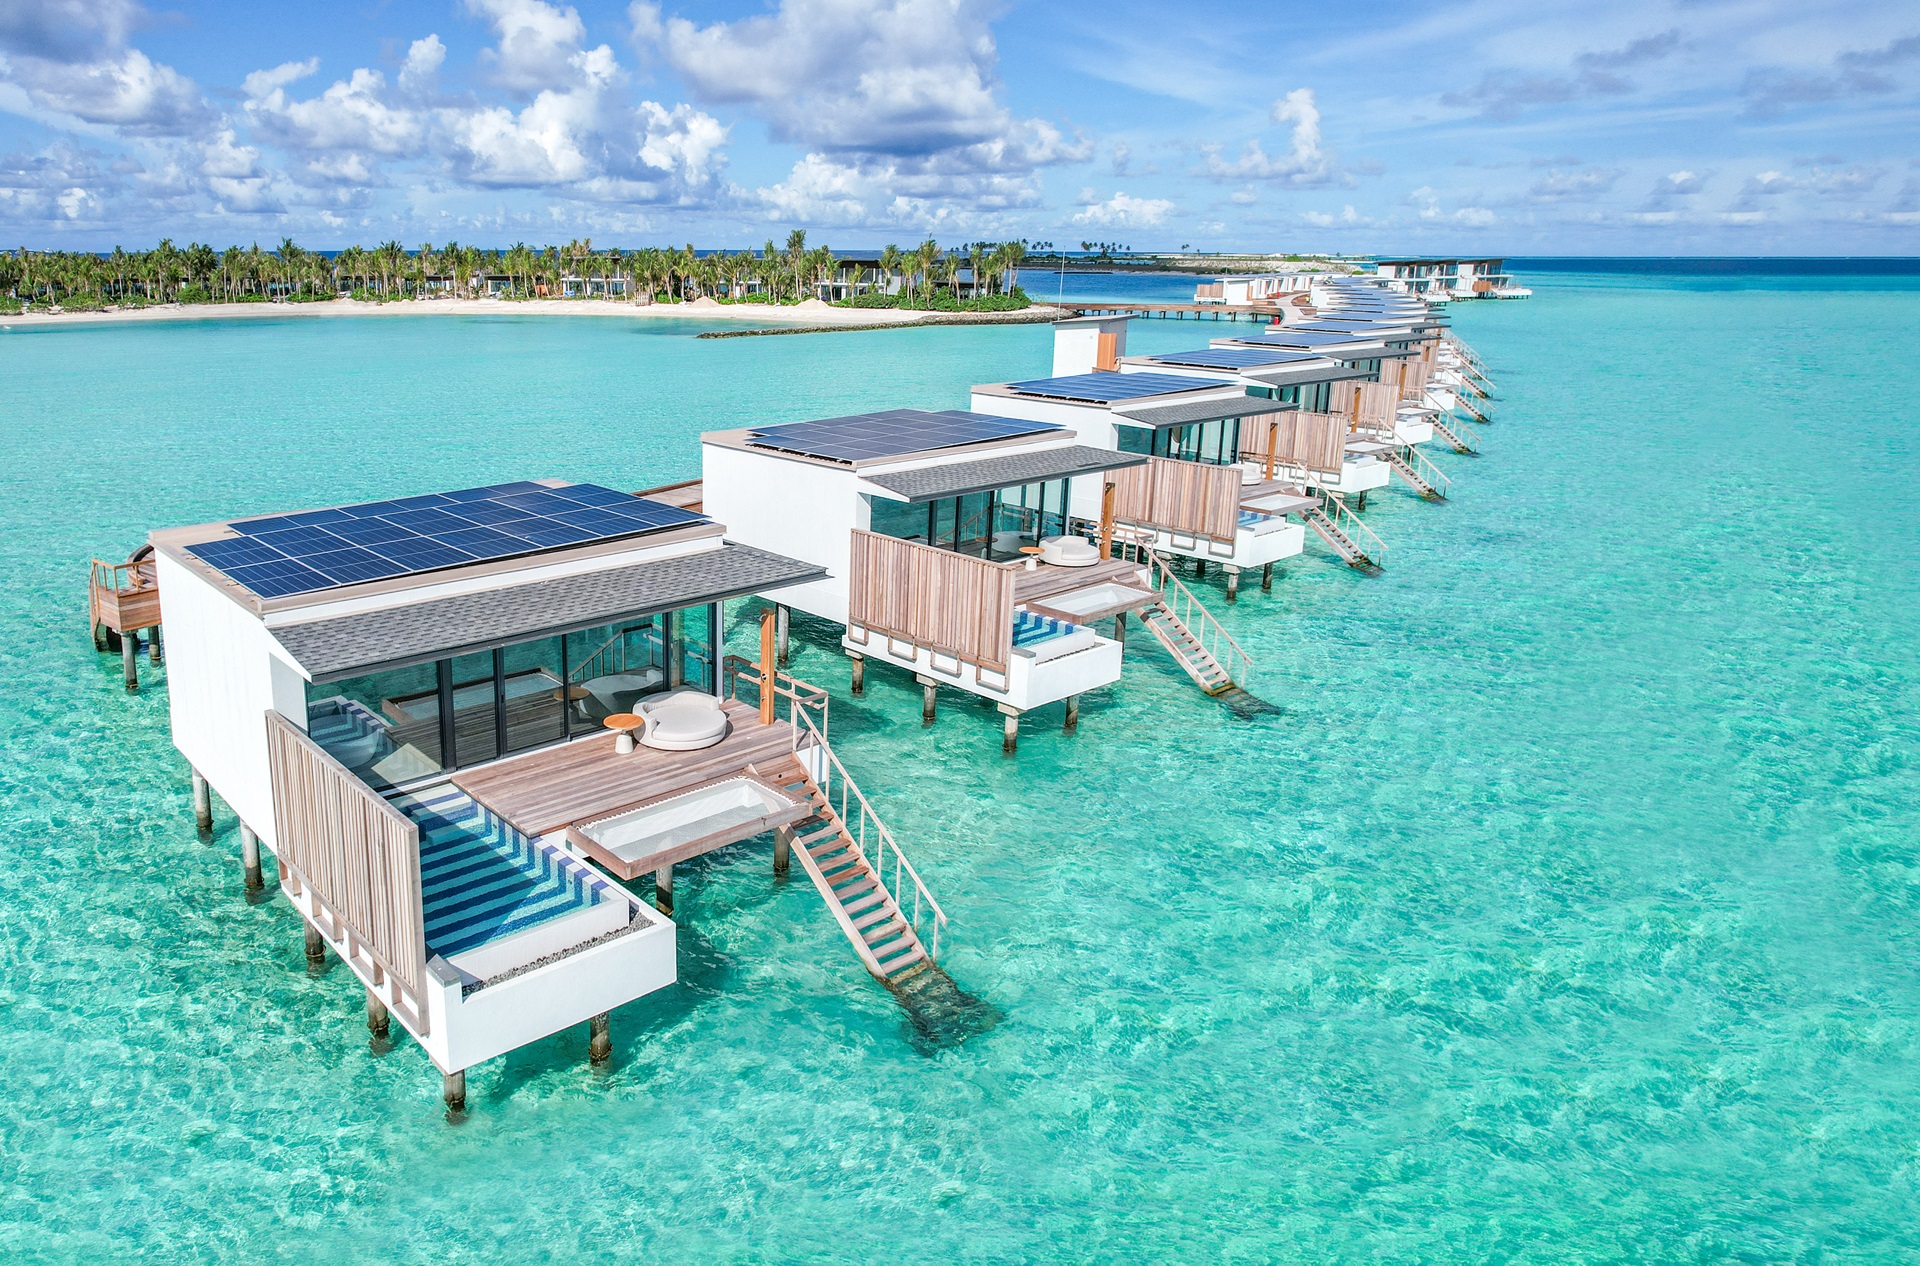 10 night special package rate at the new SO/ Maldives!